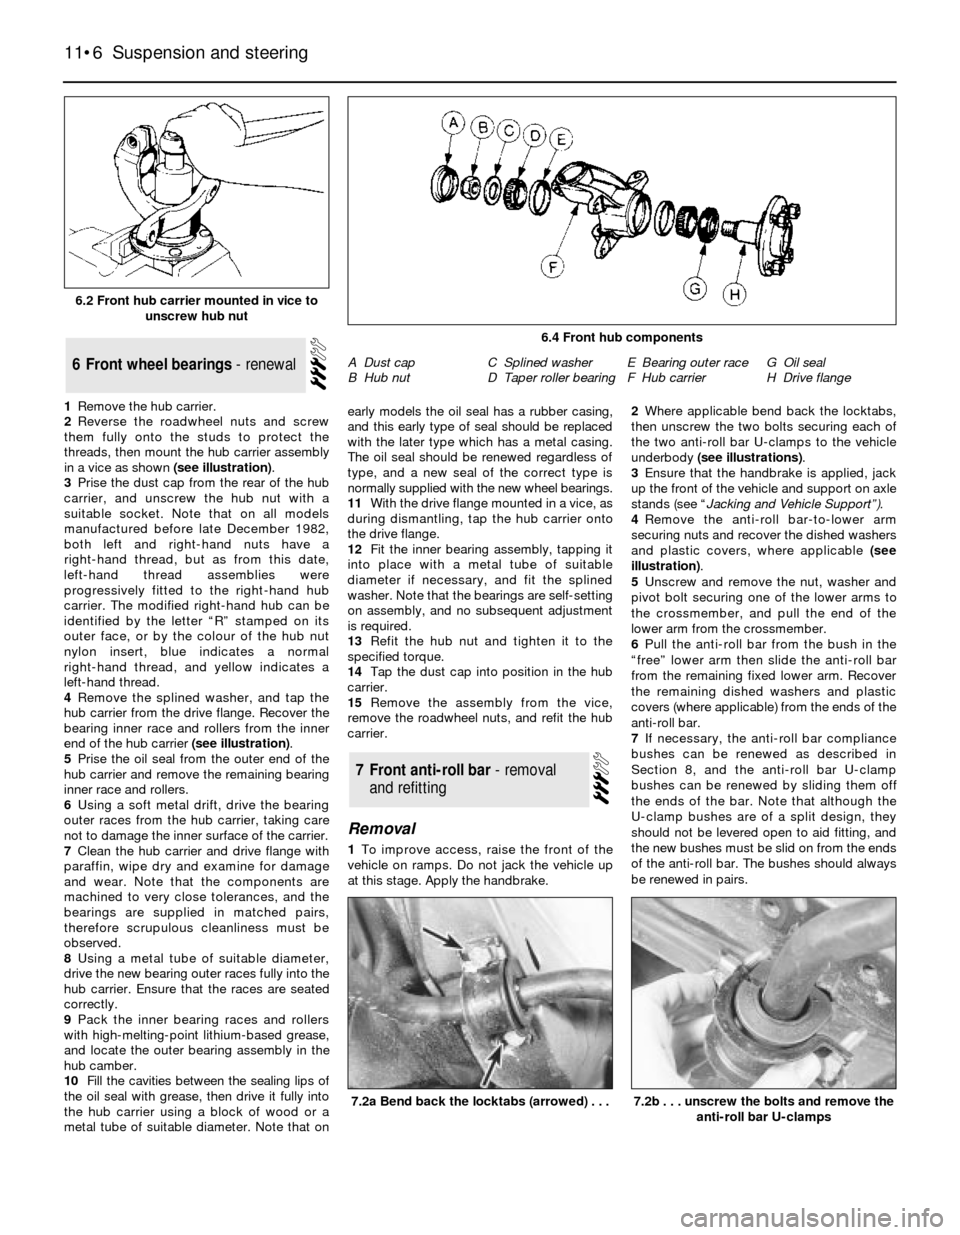 FORD SIERRA 1984 1.G Suspension And Steering Workshop Manual 1Remove the hub carrier.
2Reverse the roadwheel nuts and screw
them fully onto the studs to protect the
threads, then mount the hub carrier assembly
in a vice as shown (see illustration).
3Prise the d